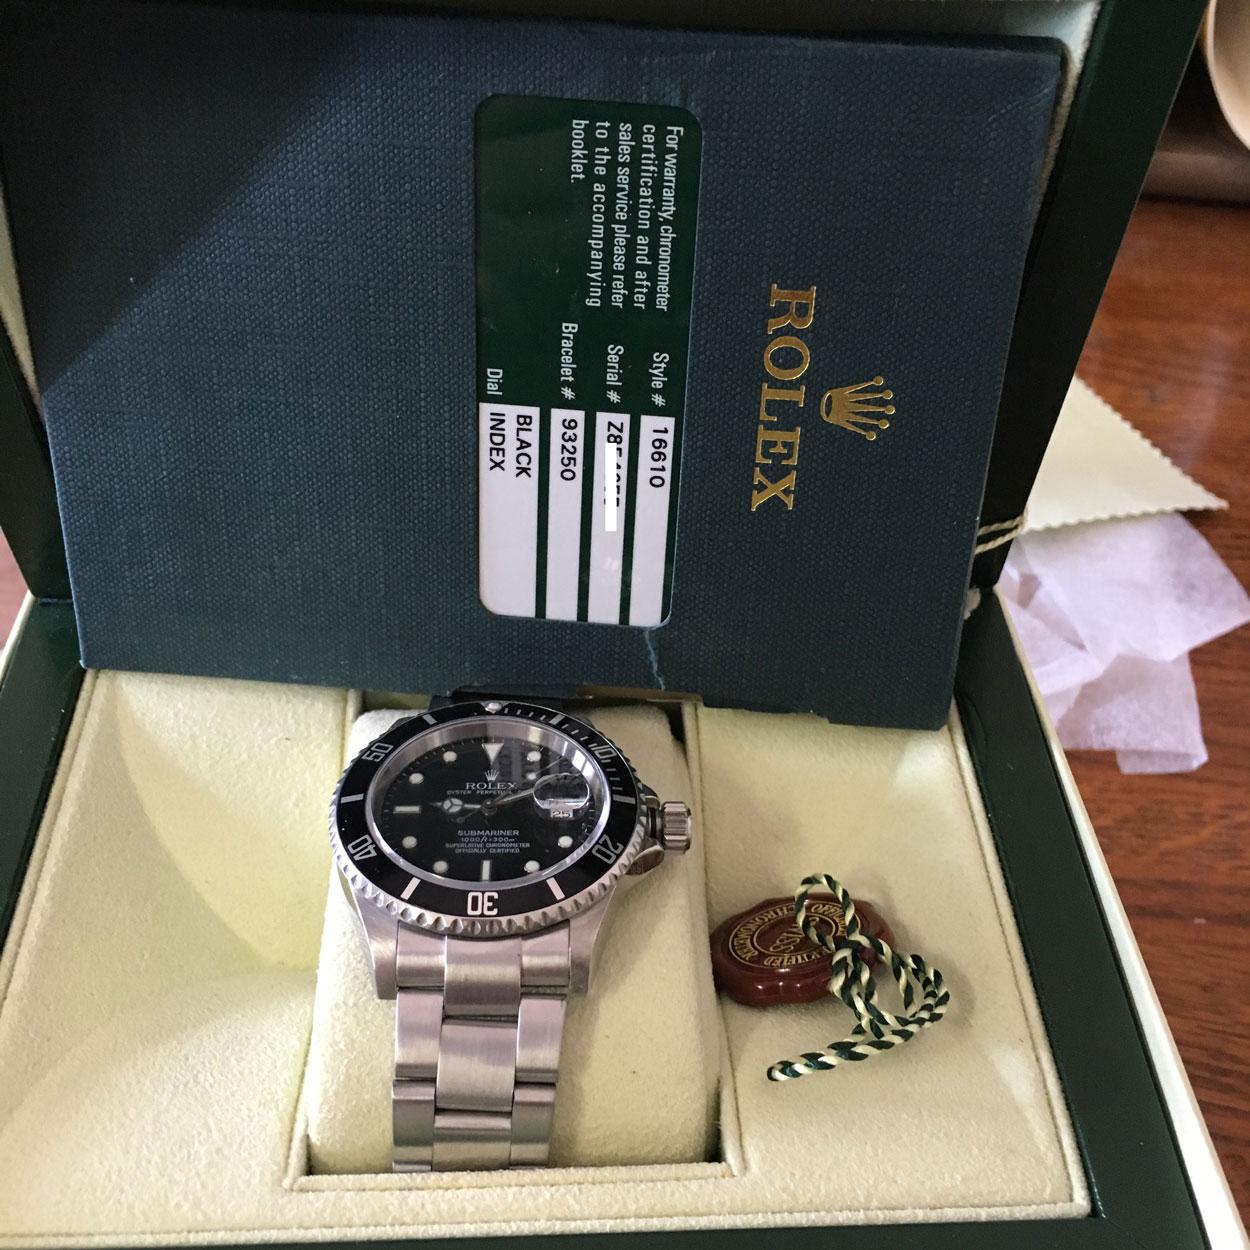 Rolex Submariner Black Dial
Condition - Mint, No dings, dents or scratches.
Model - 16610
Serial - Z
Case SIze - 40mm
Metal - Stainless steel
Dial Color- Black
Bezel - Black
Bracelet - Oyster , 7.5 Inches Wrist Size
Box- Yes Rolex Original